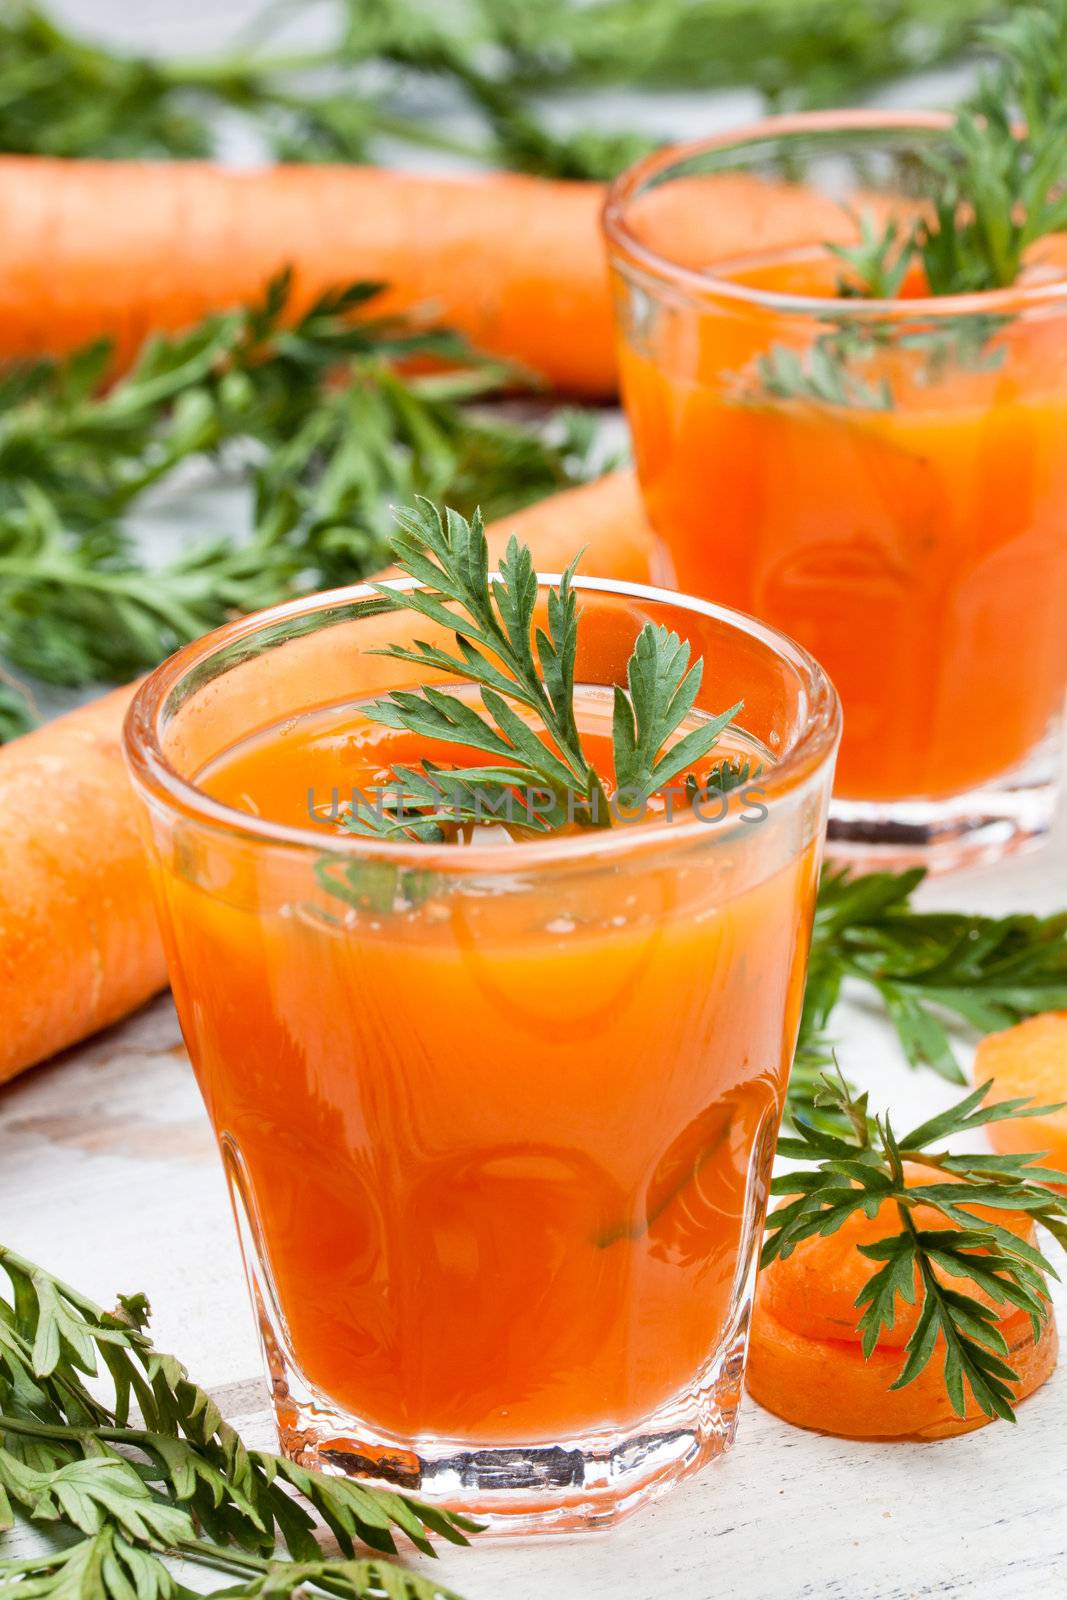 carrot juice by maxg71